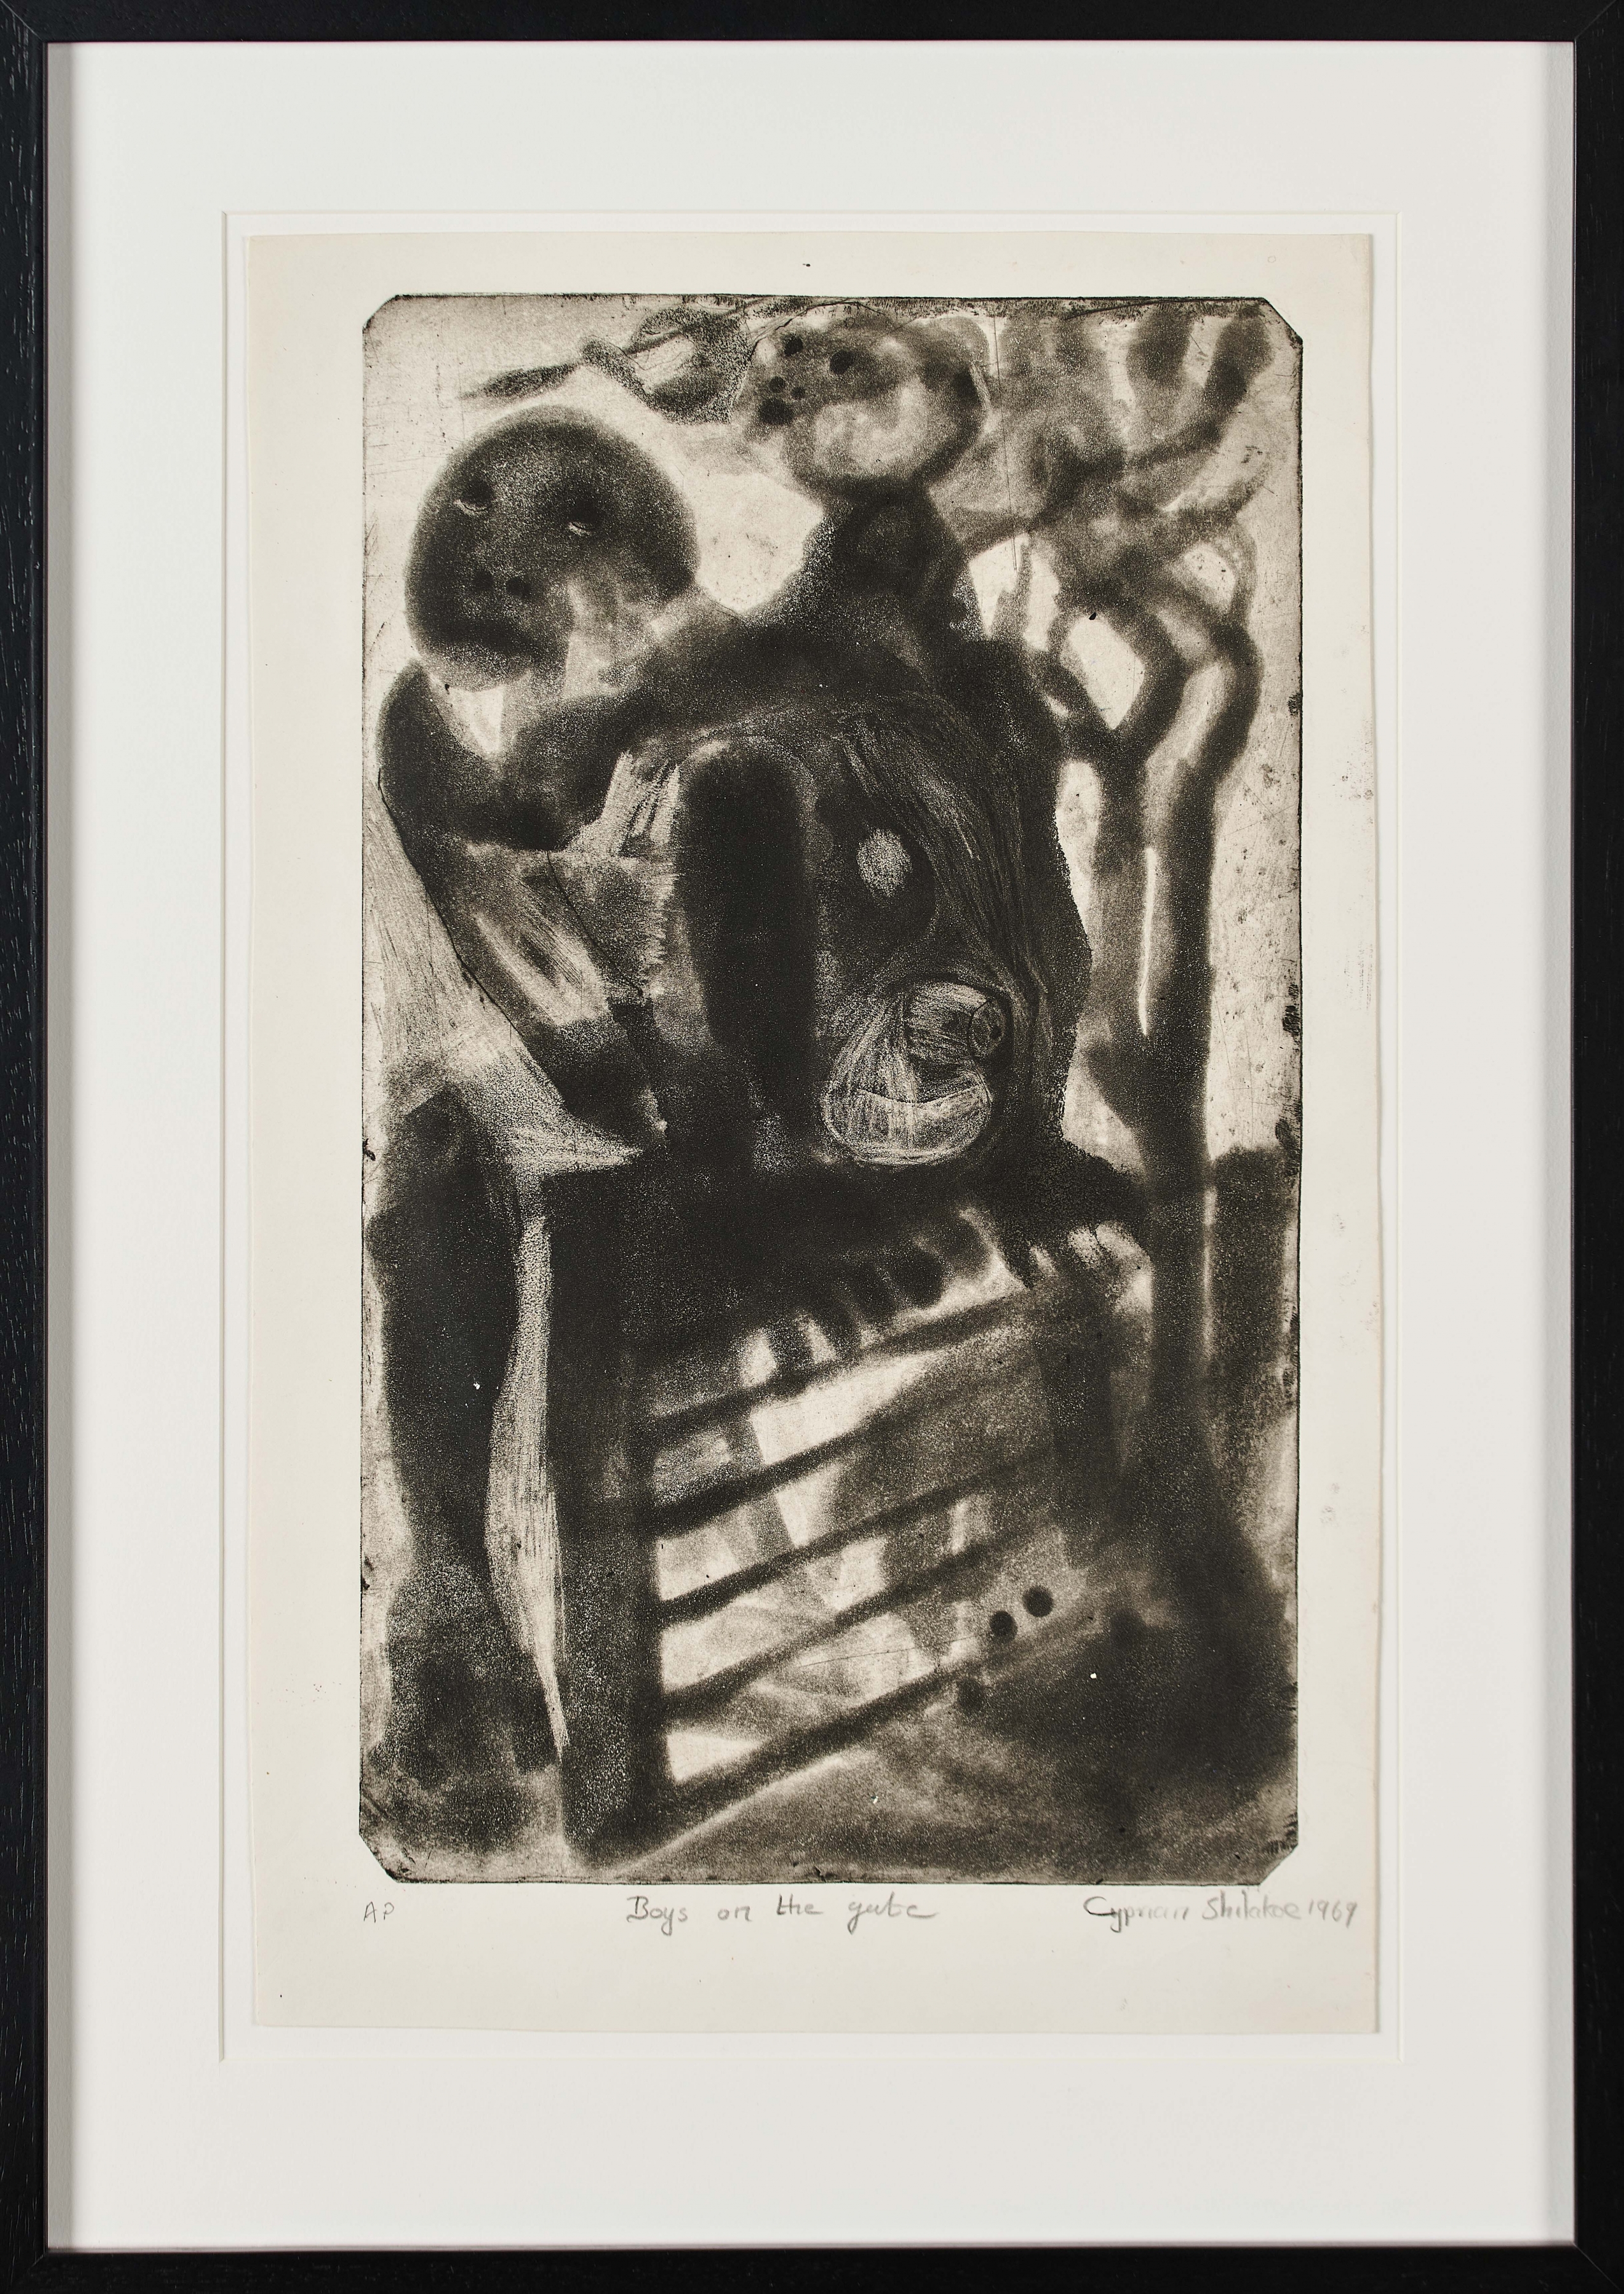 Cyprian Shilakoe

Boys on the gate, 1969

Etching

41.5 x 24 cm (16.1 x 9.5 in)

AP from an Edition of 15

Enquire

&amp;nbsp;